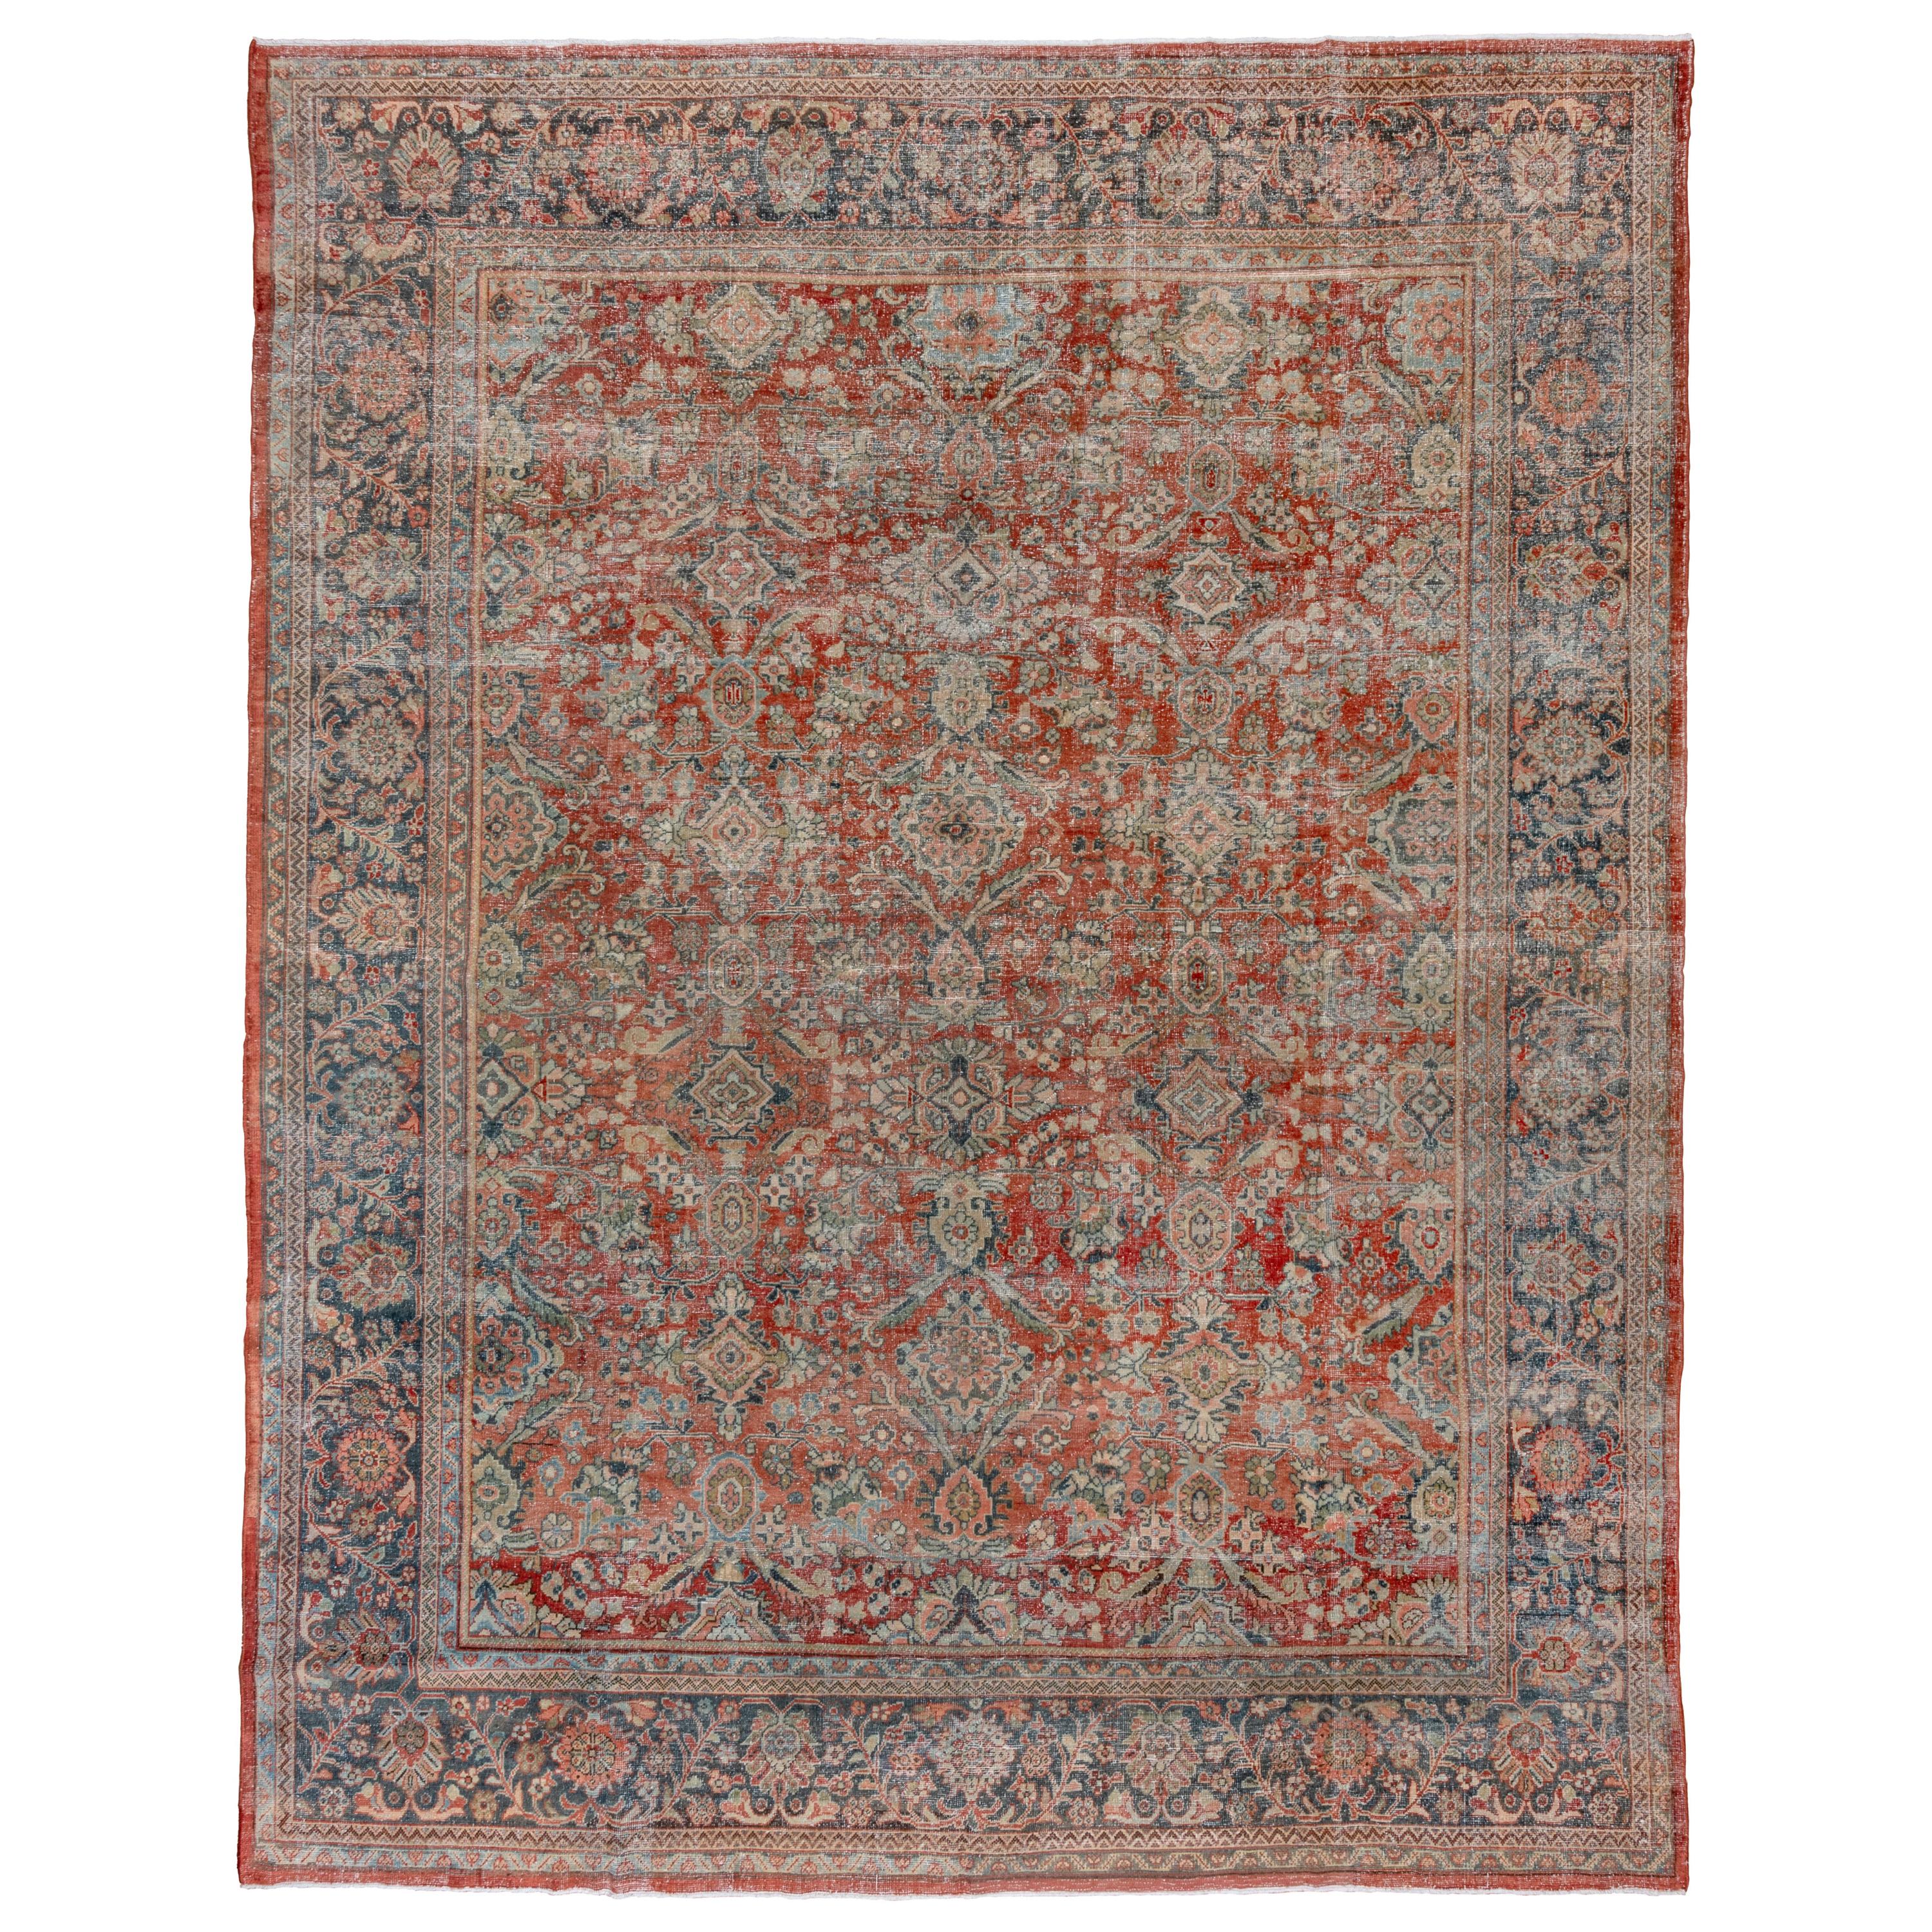 Lightly Distressed Antique Persian Mahal Rug, Red All-Over Field, Teal Accents